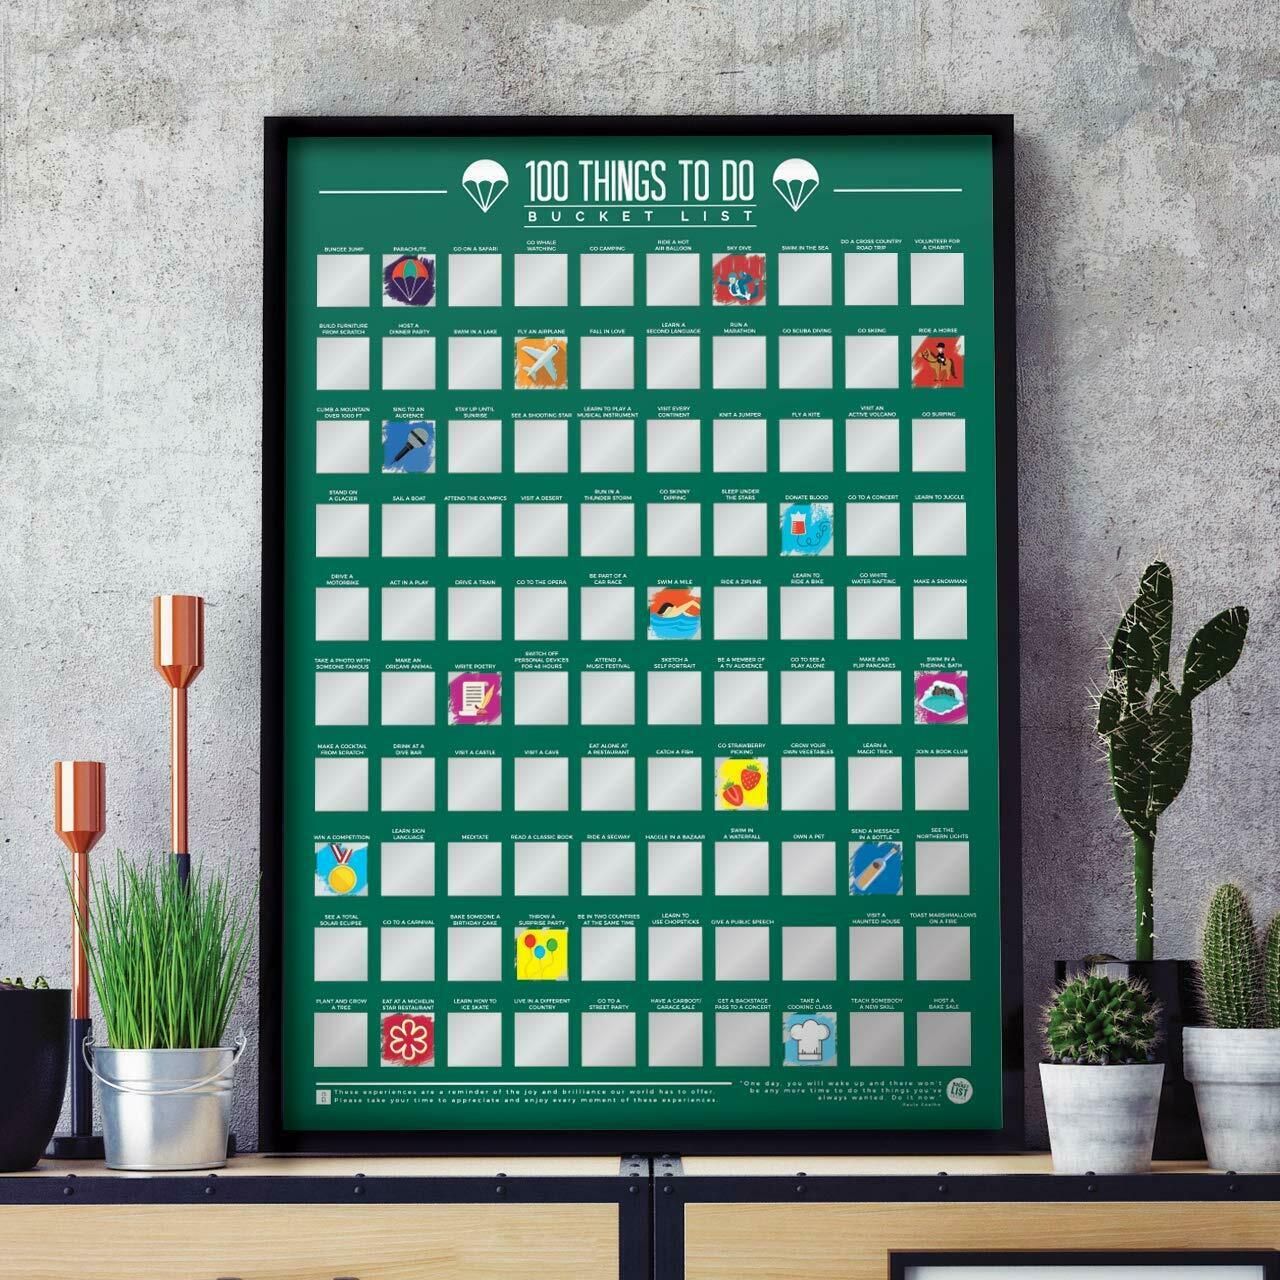 Scratch Off Poster/Bucket List - 100 THINGS TO DO